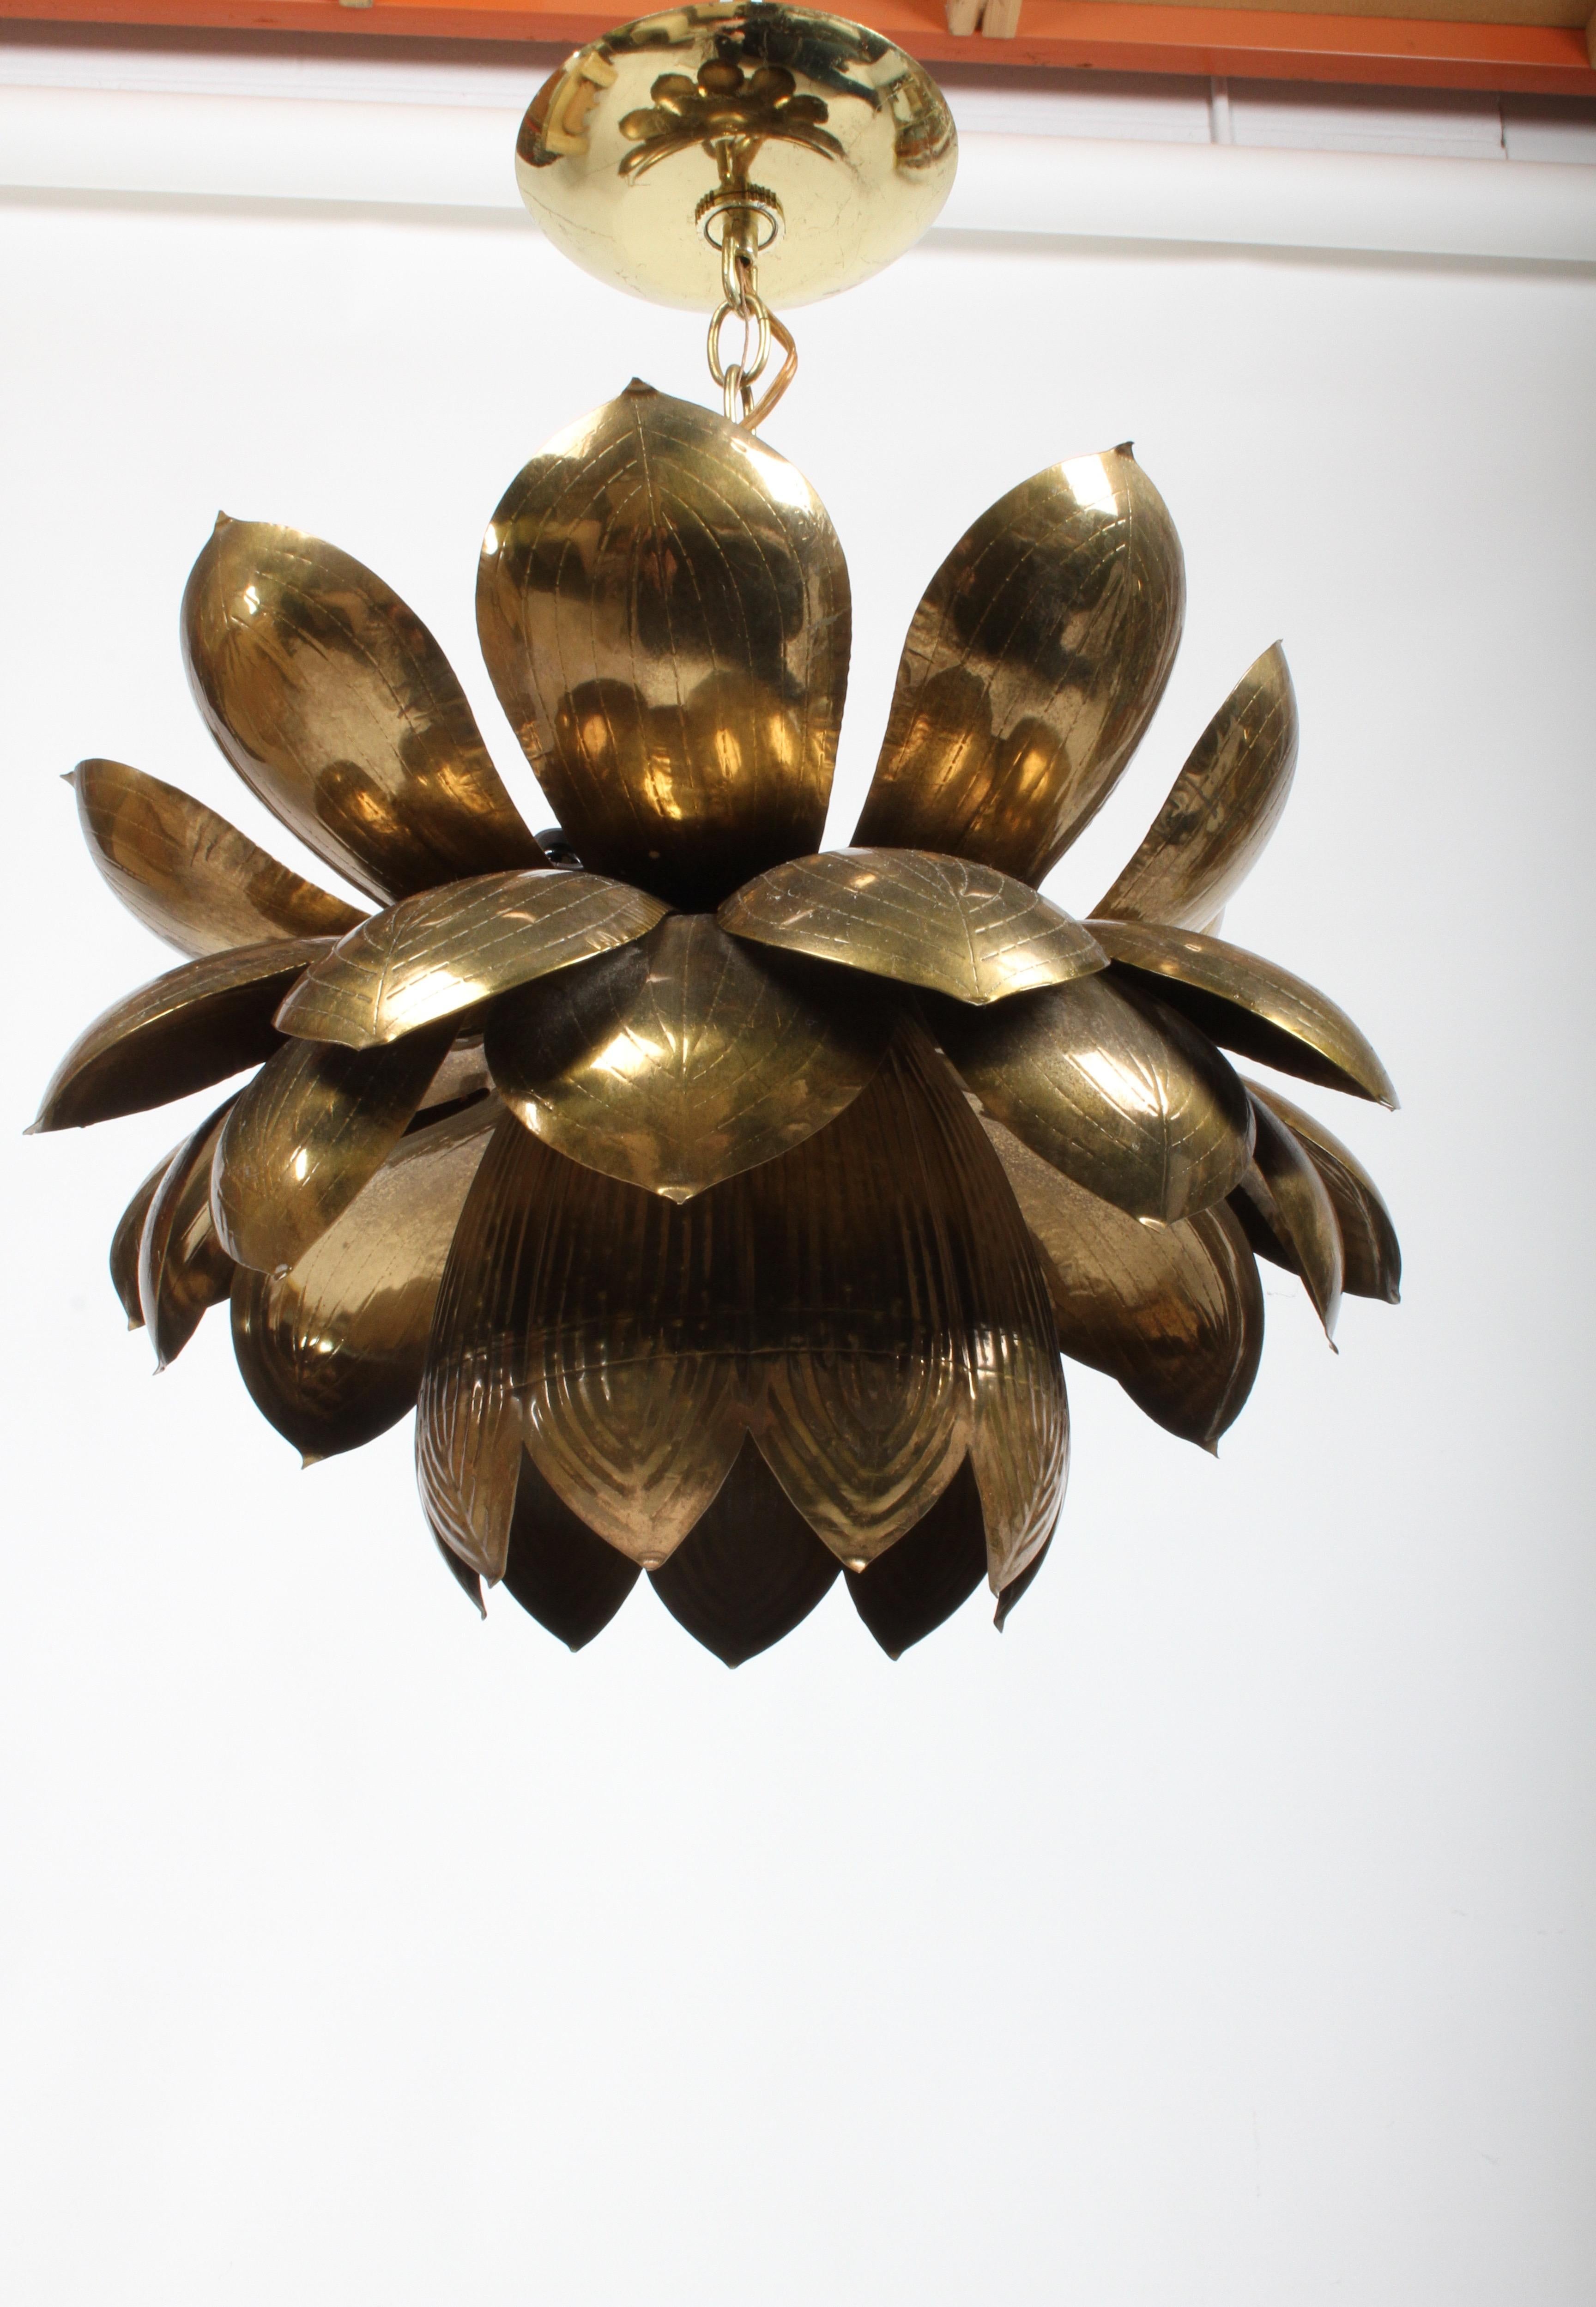 This is the large version of the Feldman Lighting Company's brass lotus chandelier, original brass patina. Three small sockets at top. The lower light uses 1 - 60 watt max 